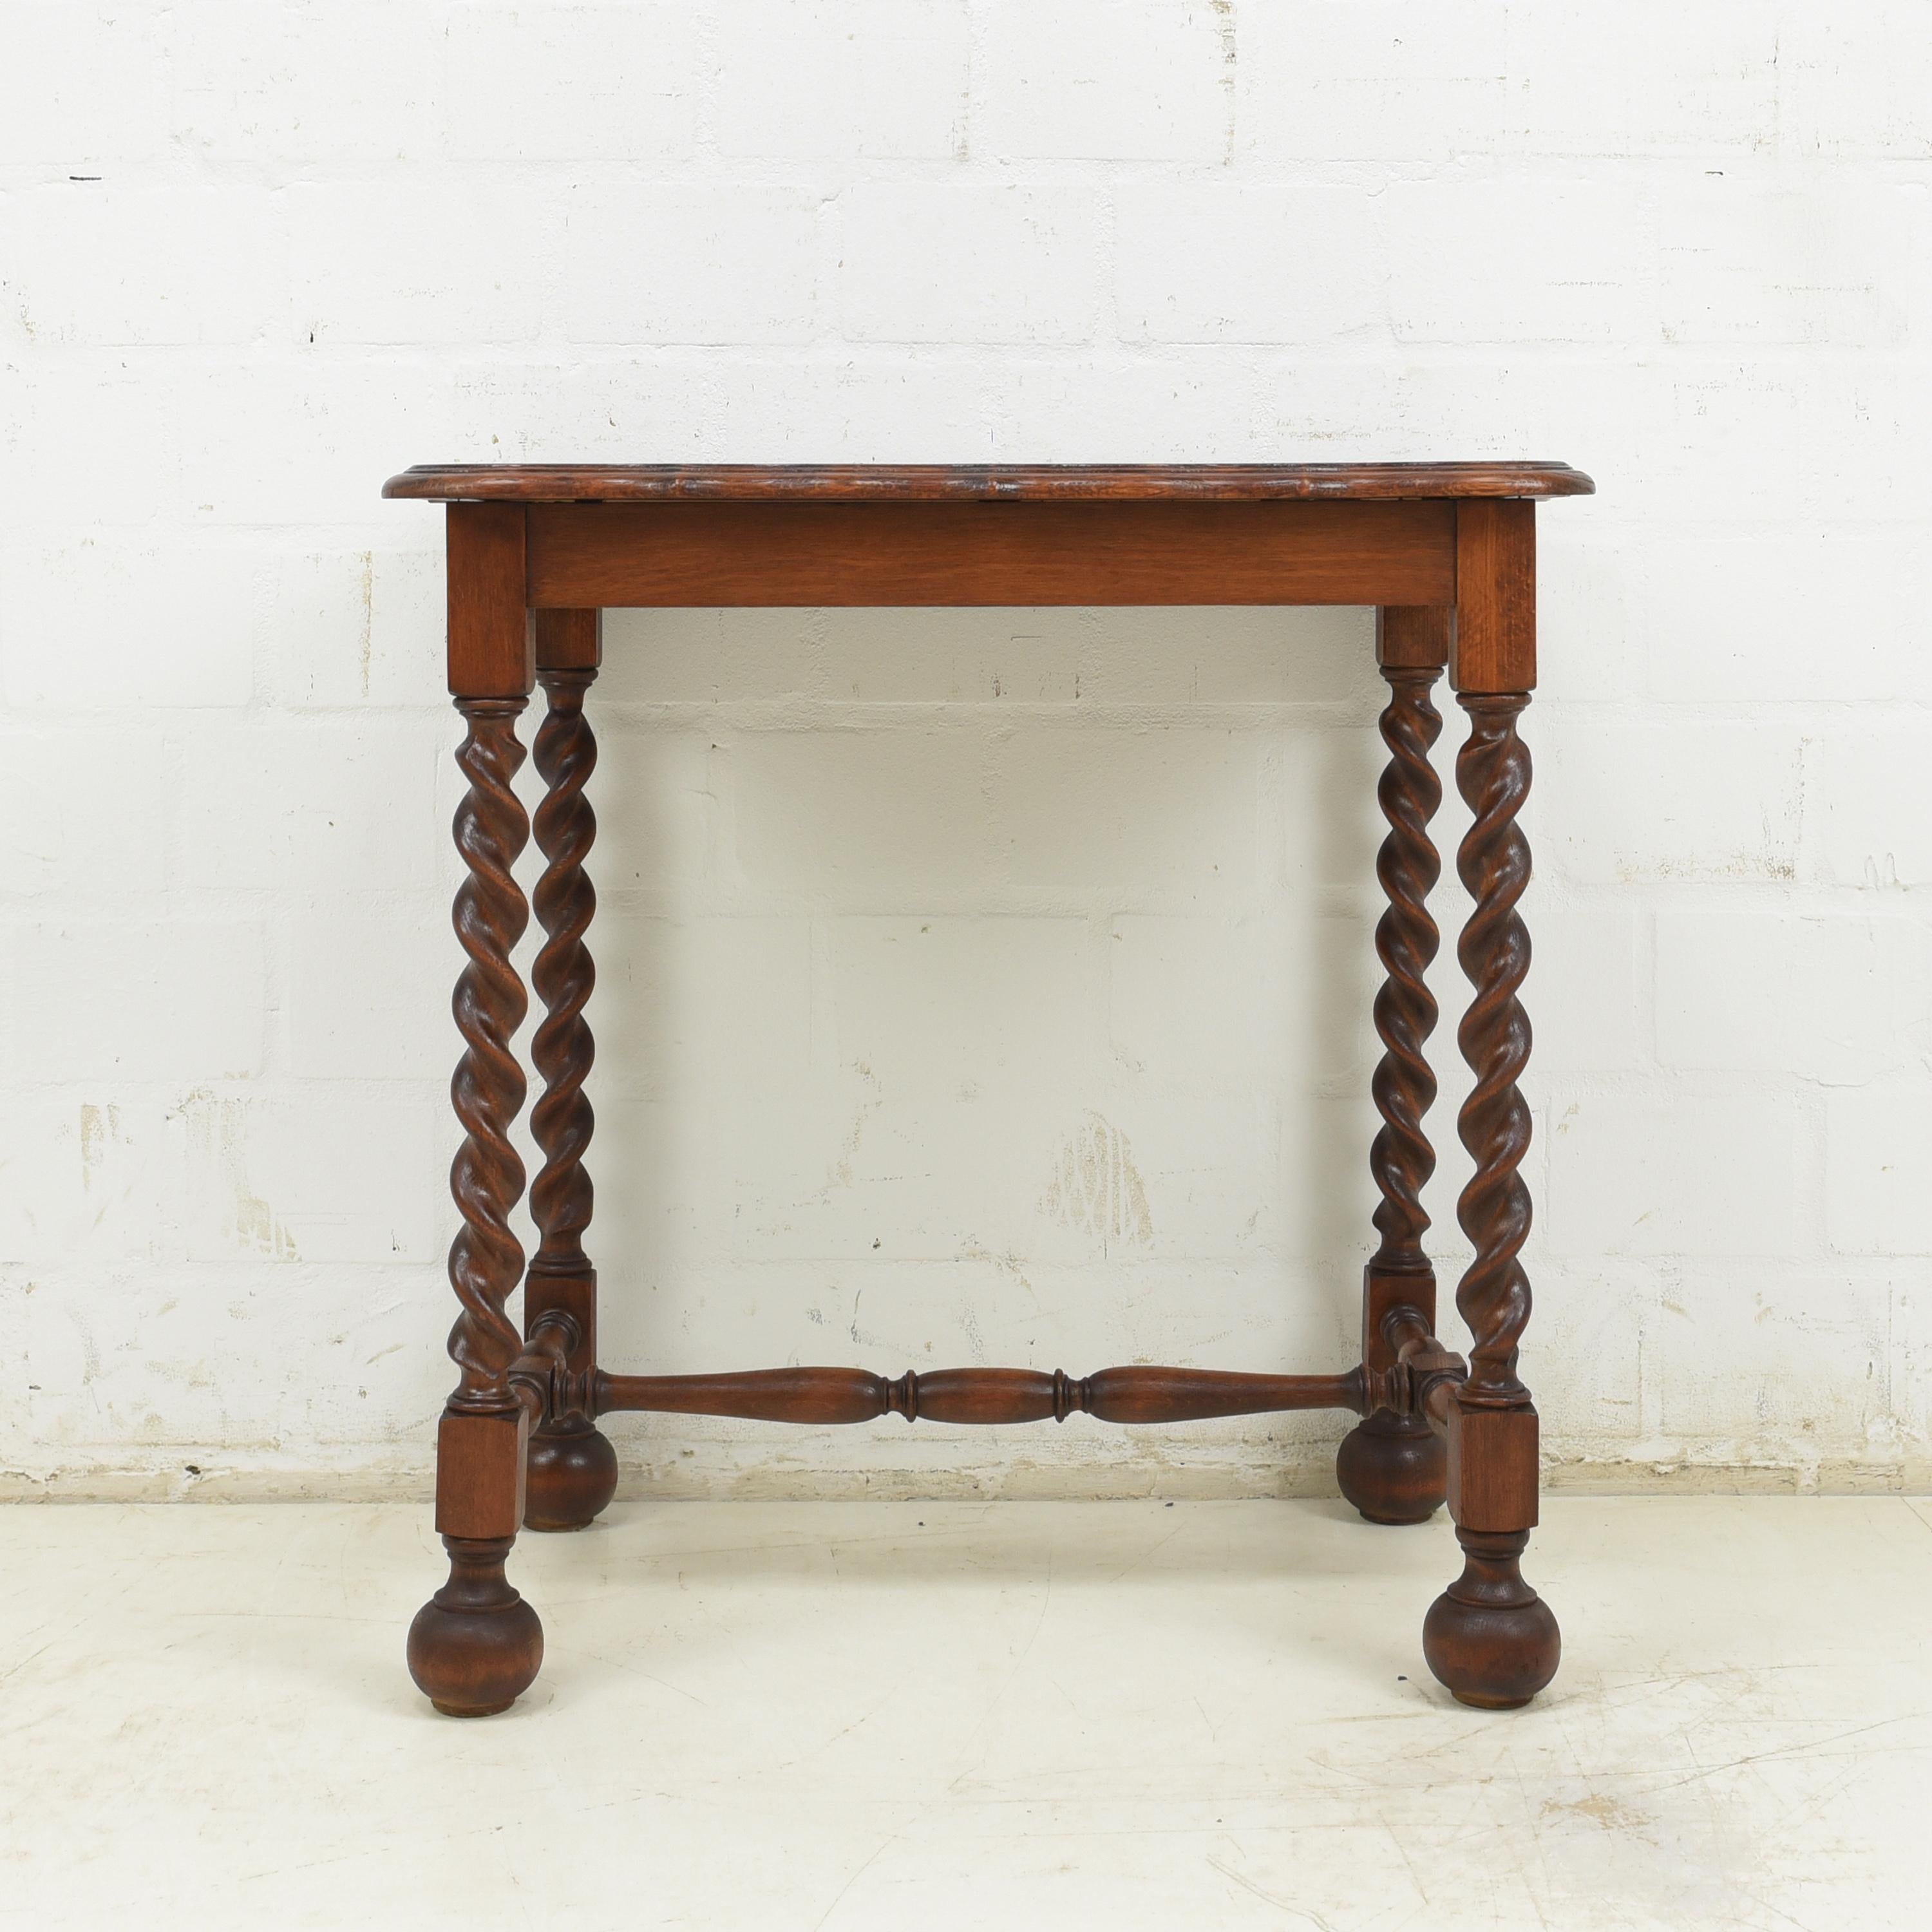 Side table restored Gründerzeit around 1890 Solid oak coffee table

Features:
Curved top on base with corkscrew legs
Beautiful patina
Decorative model

Additional information:
Material: Solid oak
Dimensions: 70 W x 48 D x 71 H